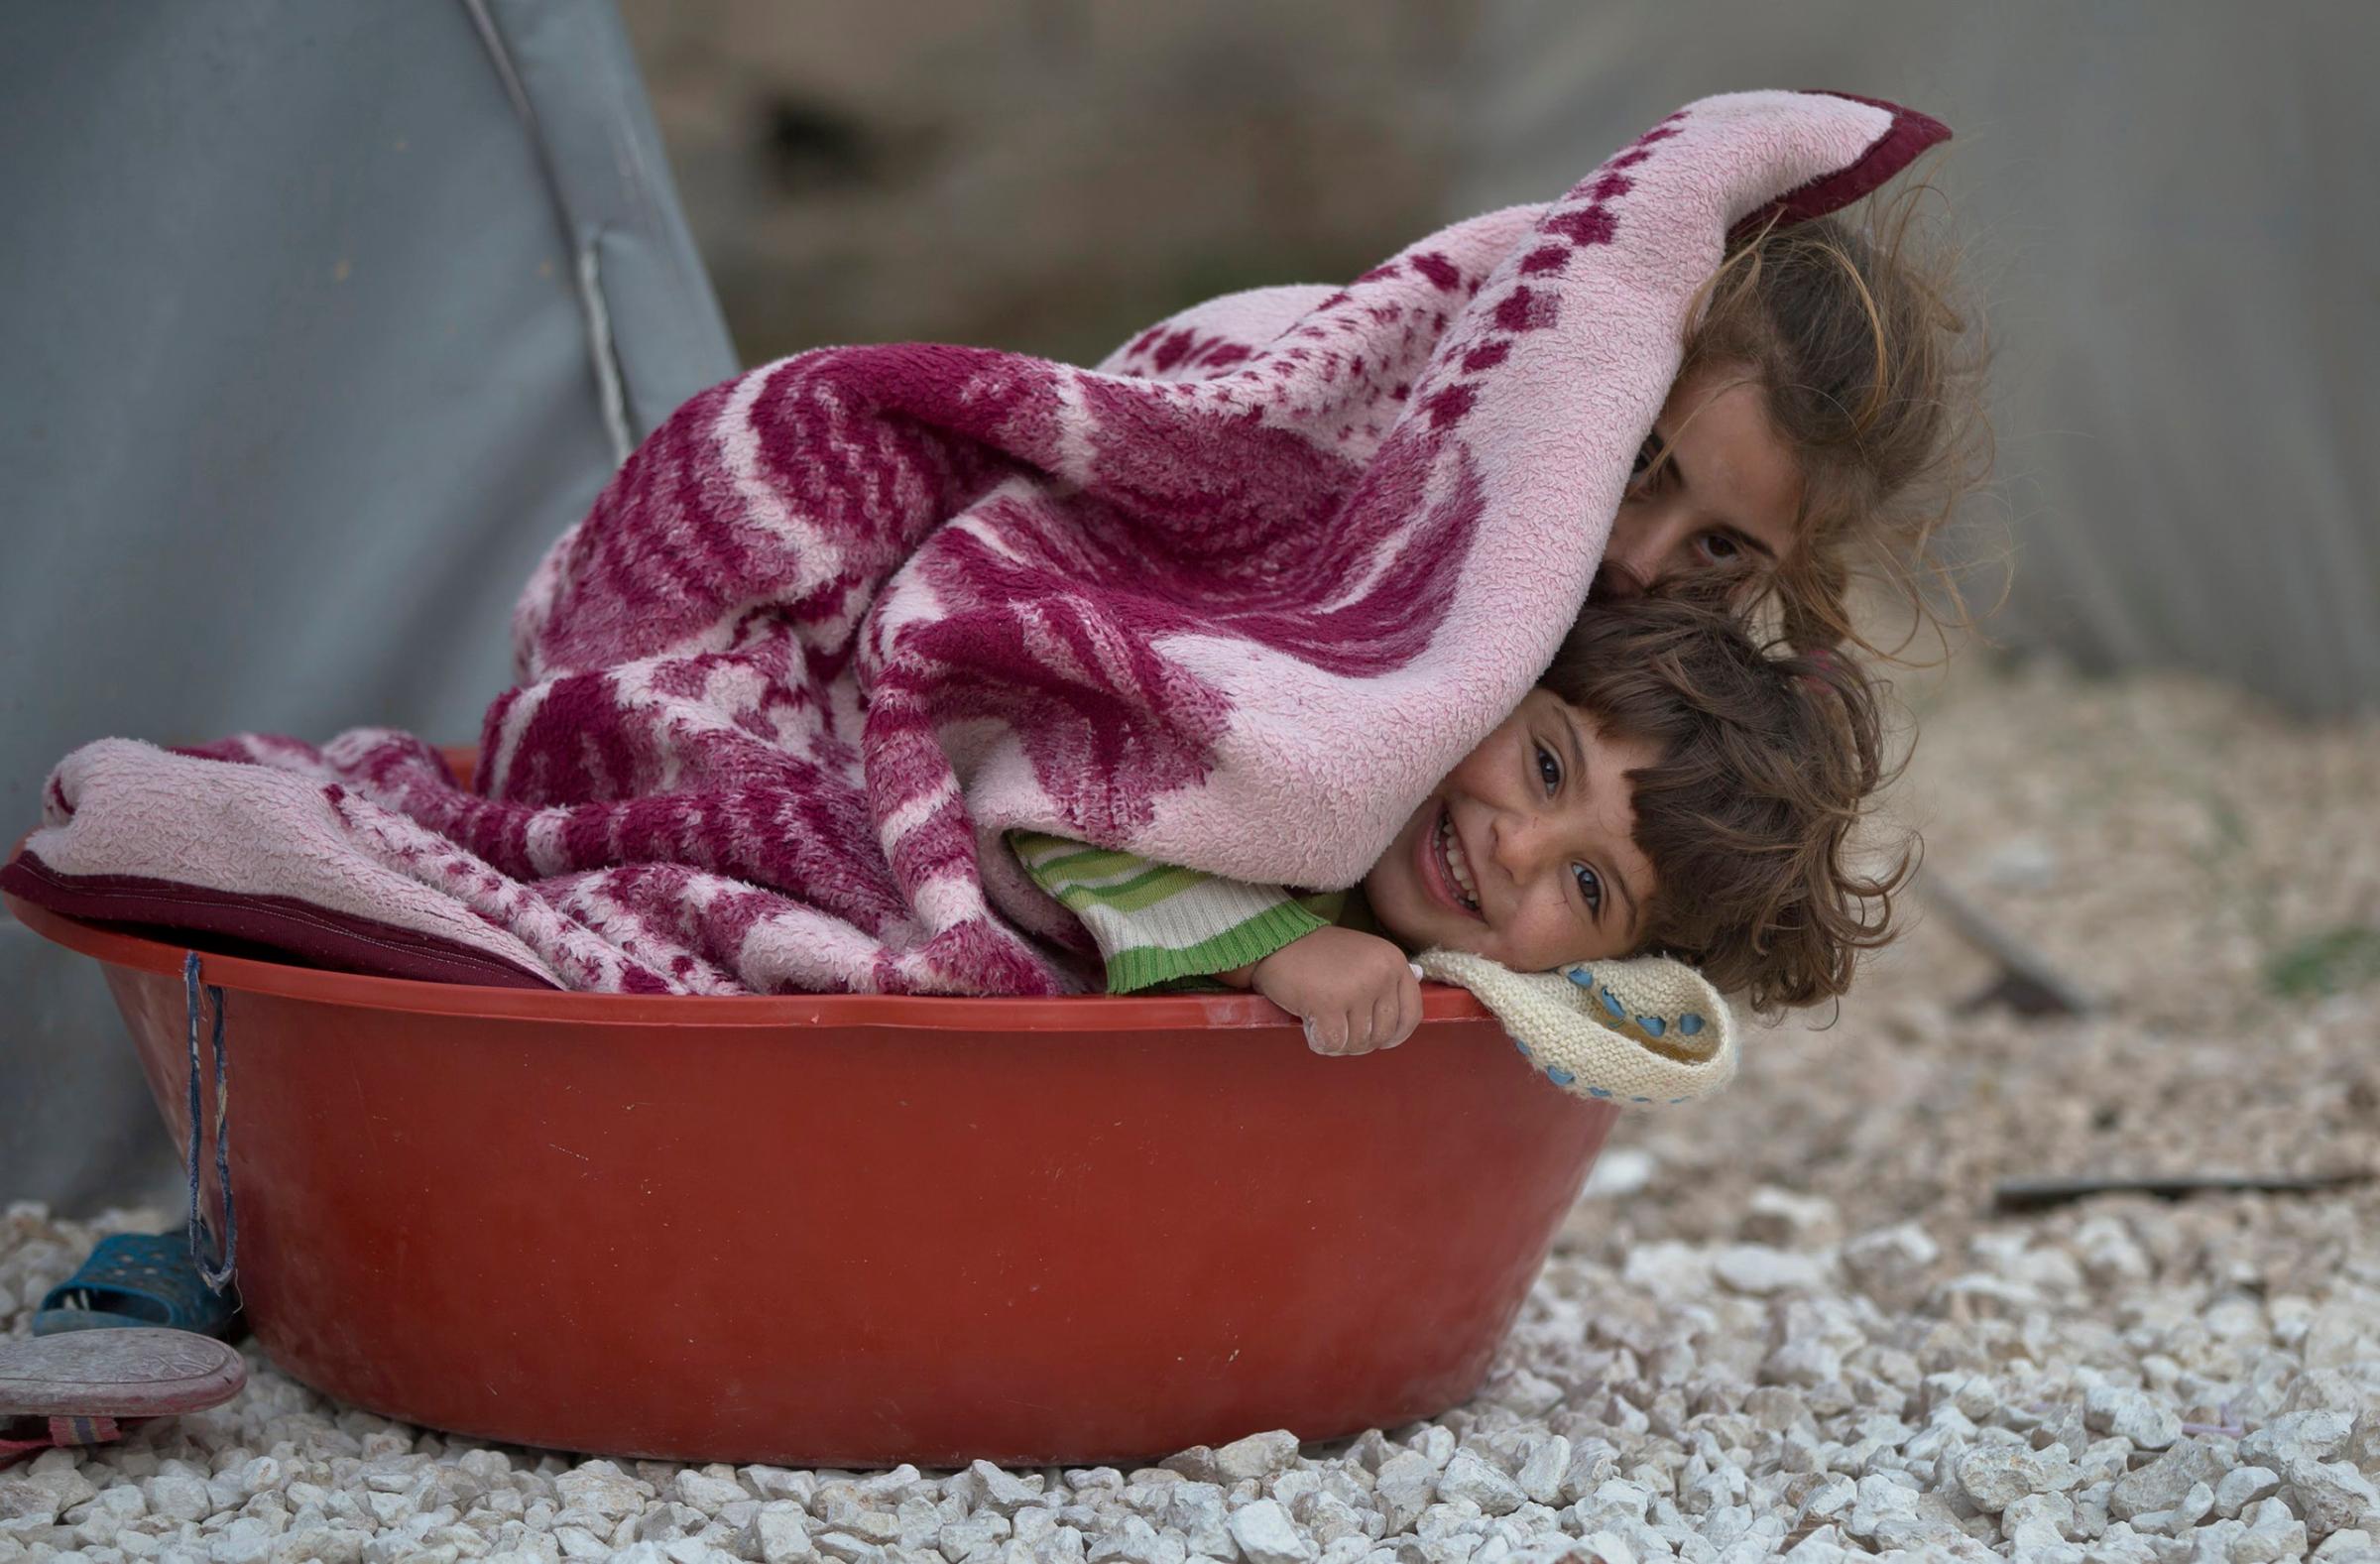 Syrian Kurdish refugee children from the Kobani area cover themselves in a blanket on a cold morning at a camp in Suruc, on the Turkey-Syria border on Nov. 16, 2014.